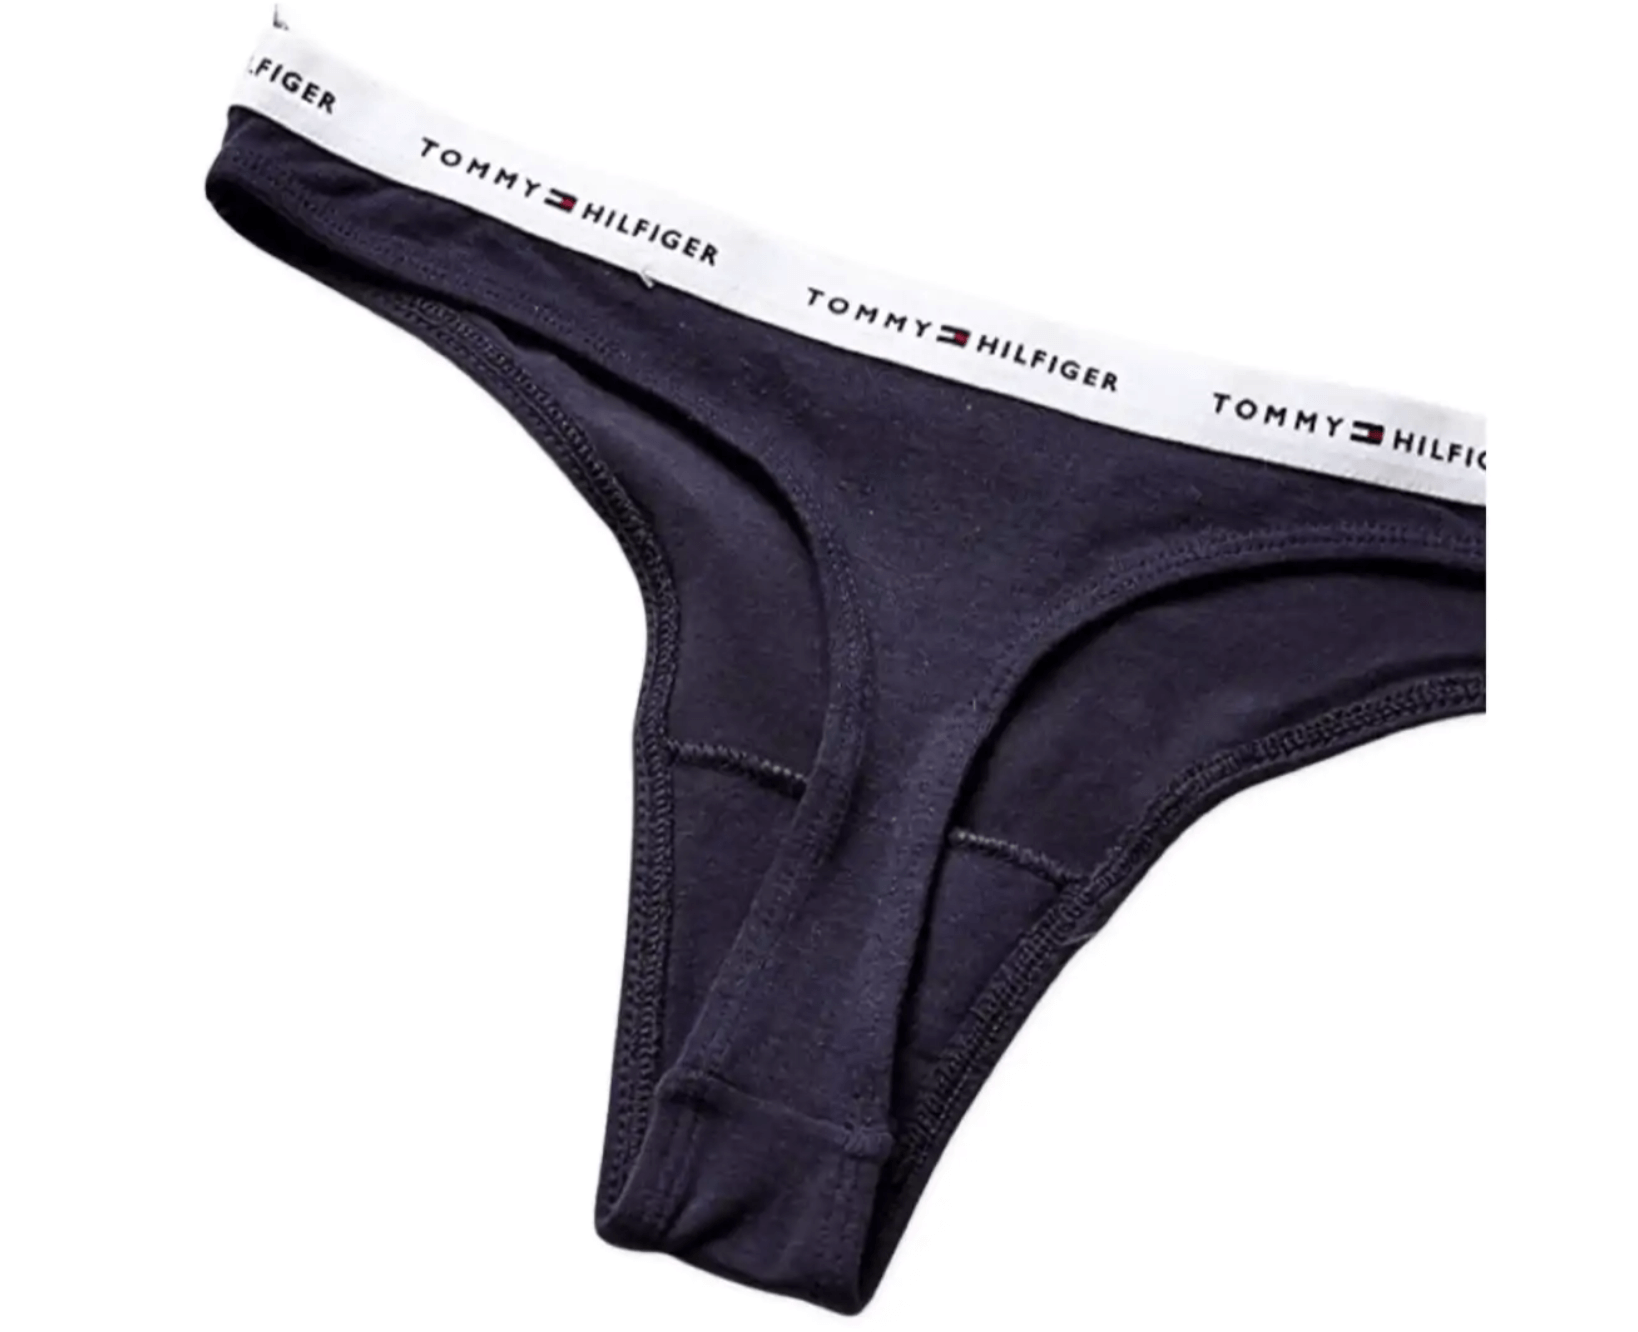 Tommy Hilfiger Women’s Soft Stretch Cotton Thongs Underwear 3-Pack - Navy/Red/White Tommy Print